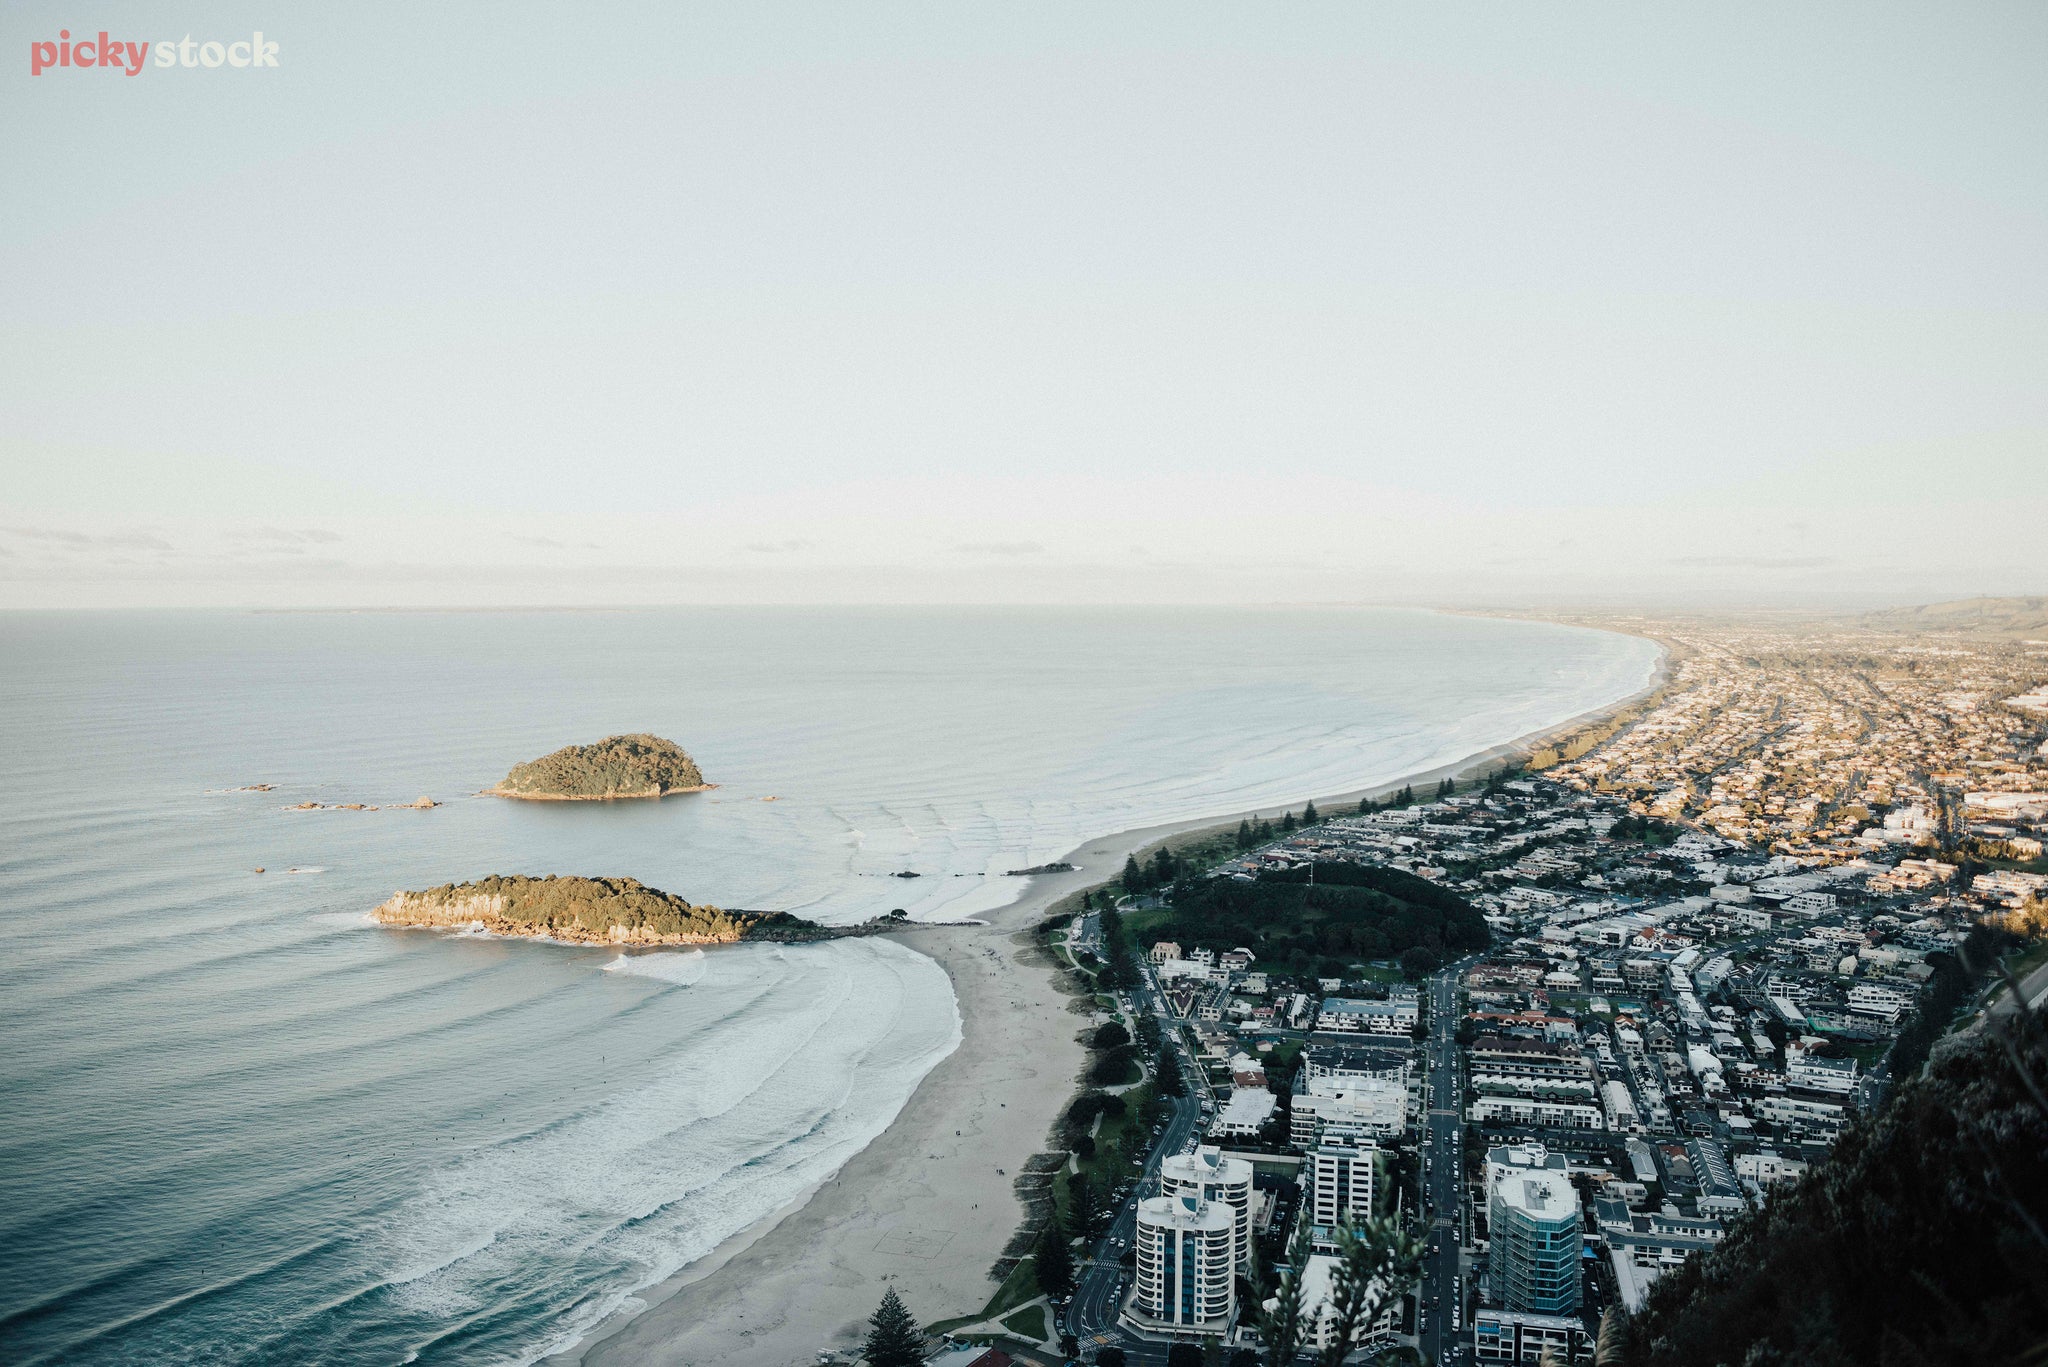 Ariel view of the Mount in Tauranga, a township built on a beach. There are two islands and waves which break on shore.